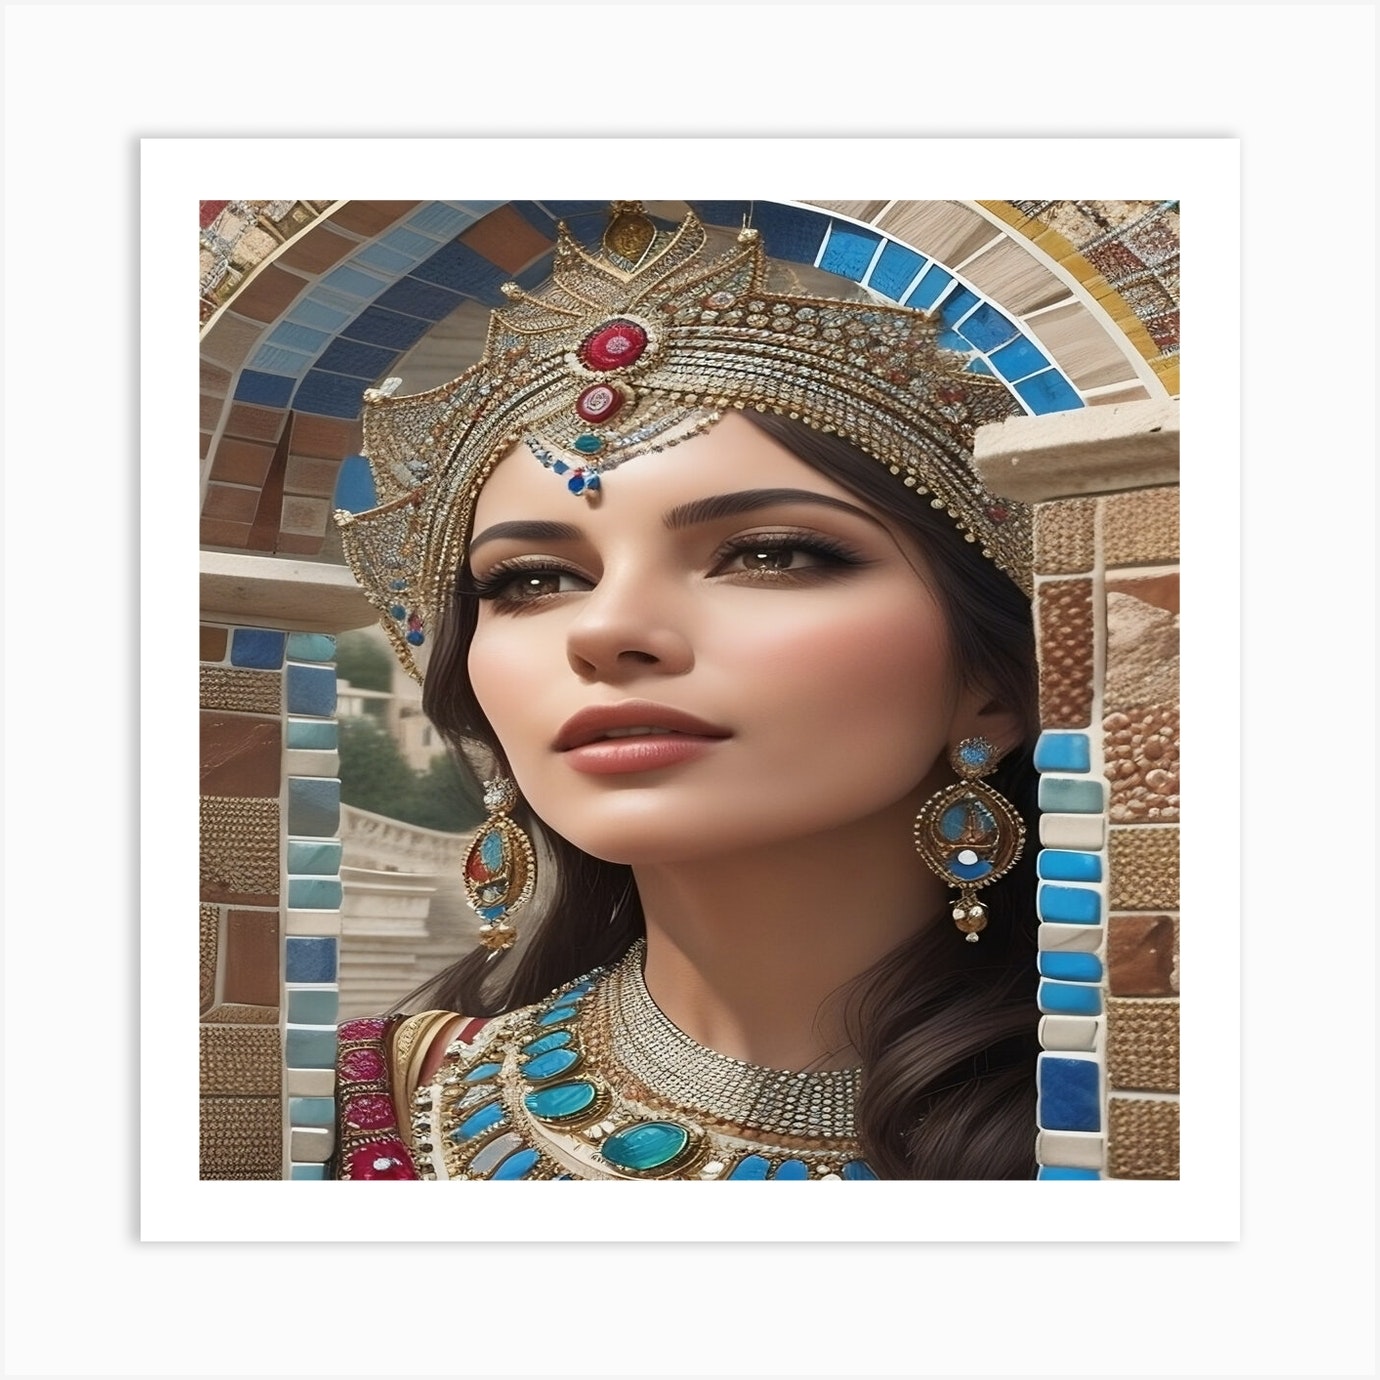 Beautiful Mosaic Lady, Beauty And Art 03 Art Print by aleebell1992 - Fy